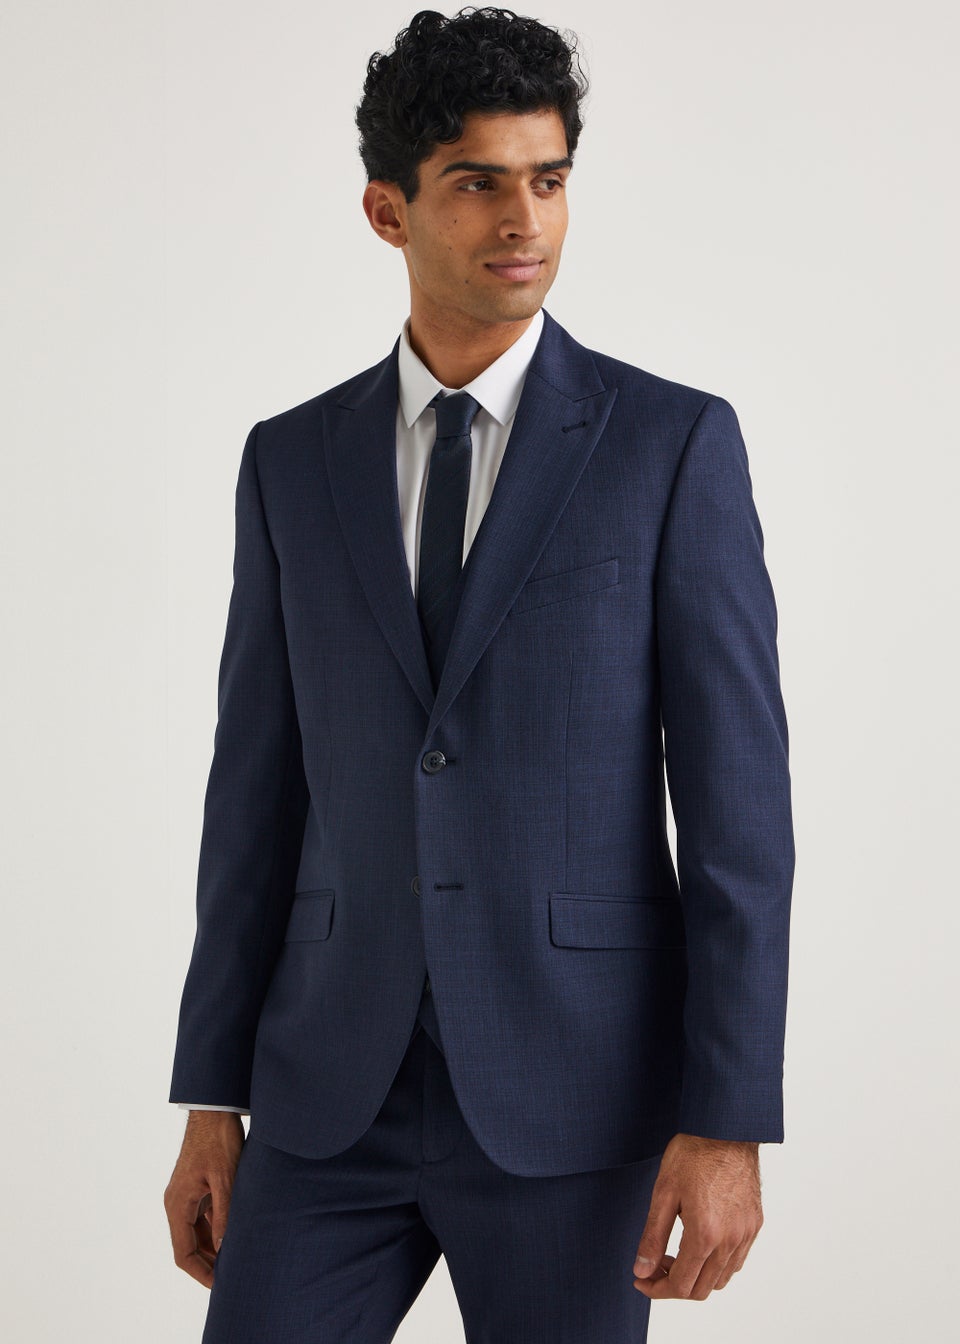 Taylor & Wright Cooper Navy Slim Fit Suit Jacket